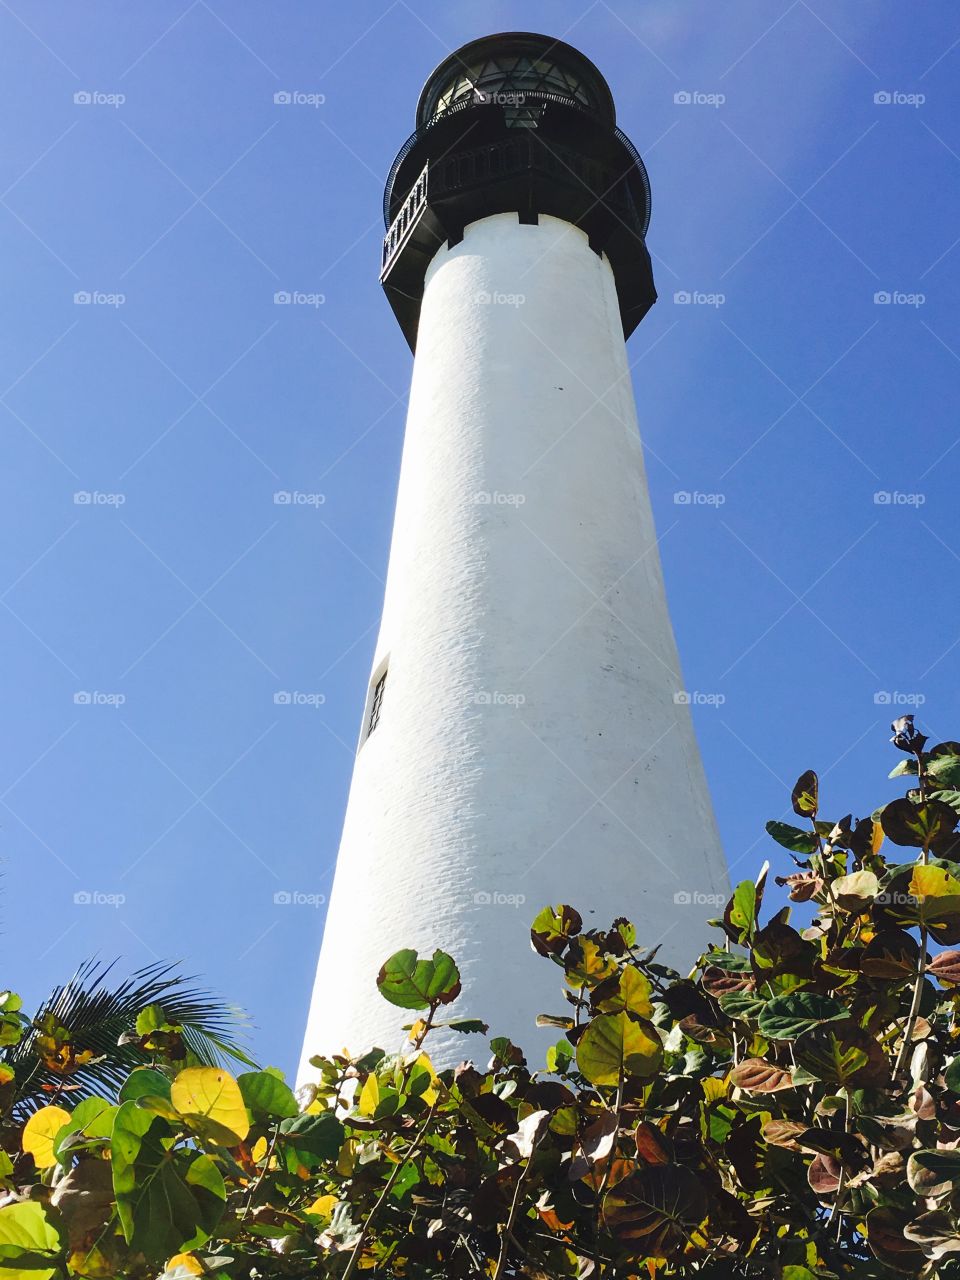 Lighthouse on a clear day.